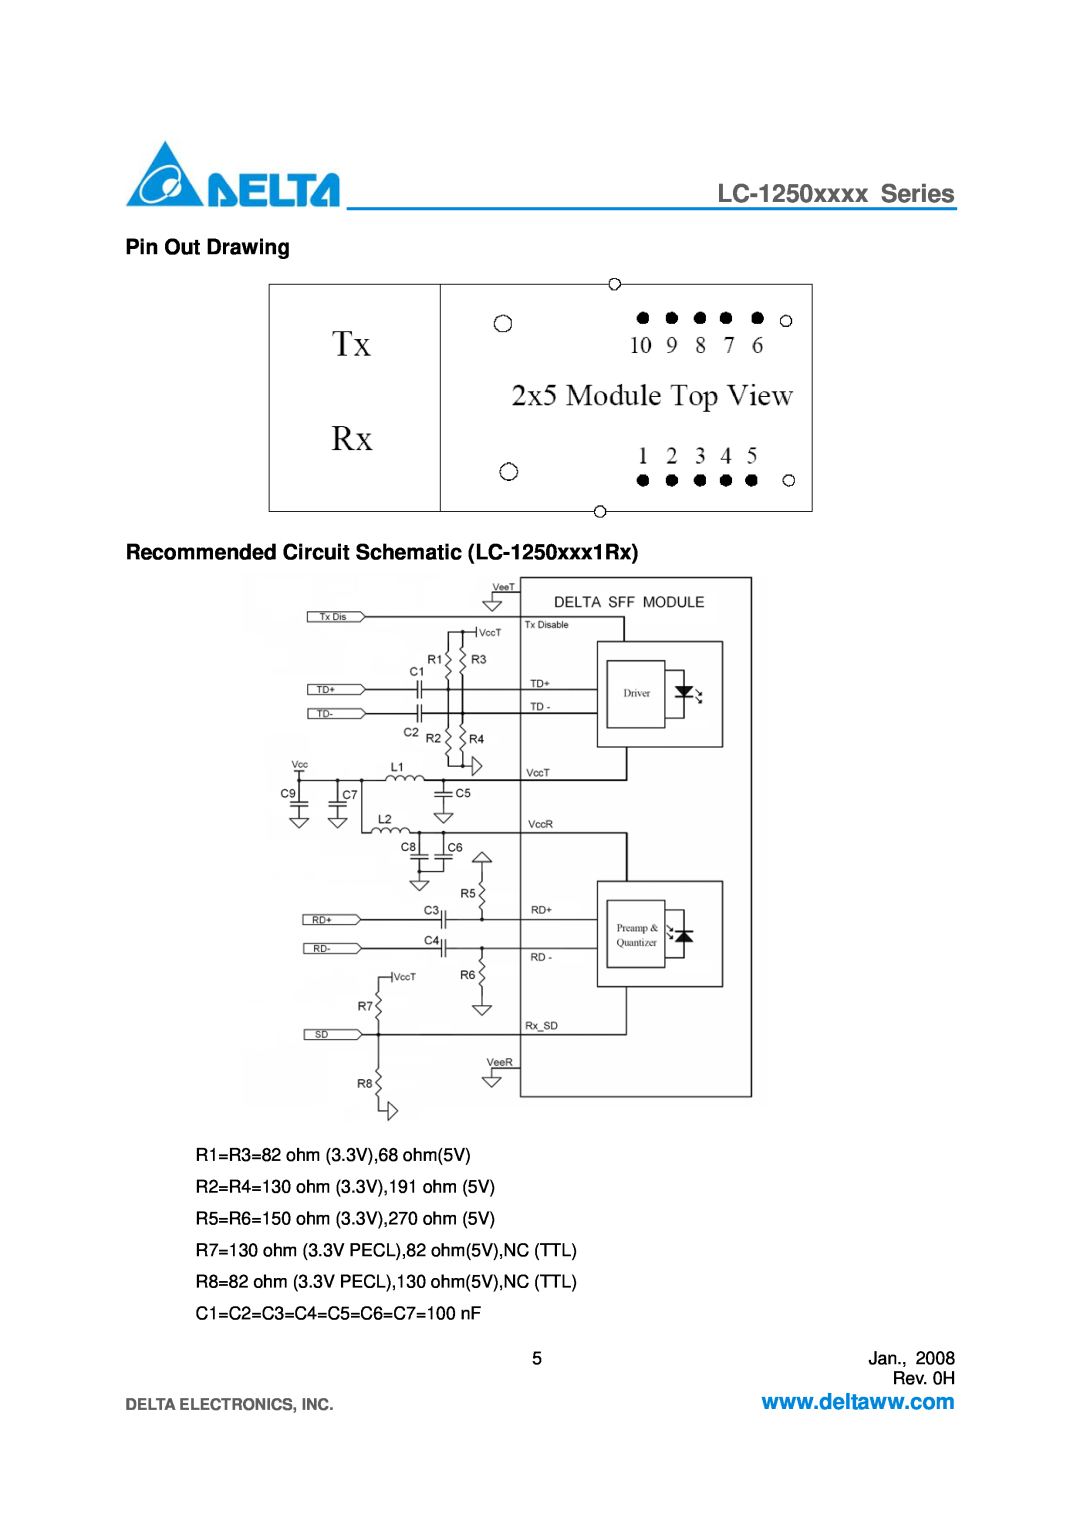 Delta Electronics LC-1250xxxx Series Pin Out Drawing Recommended Circuit Schematic LC-1250xxx1Rx, Delta Electronics, Inc 